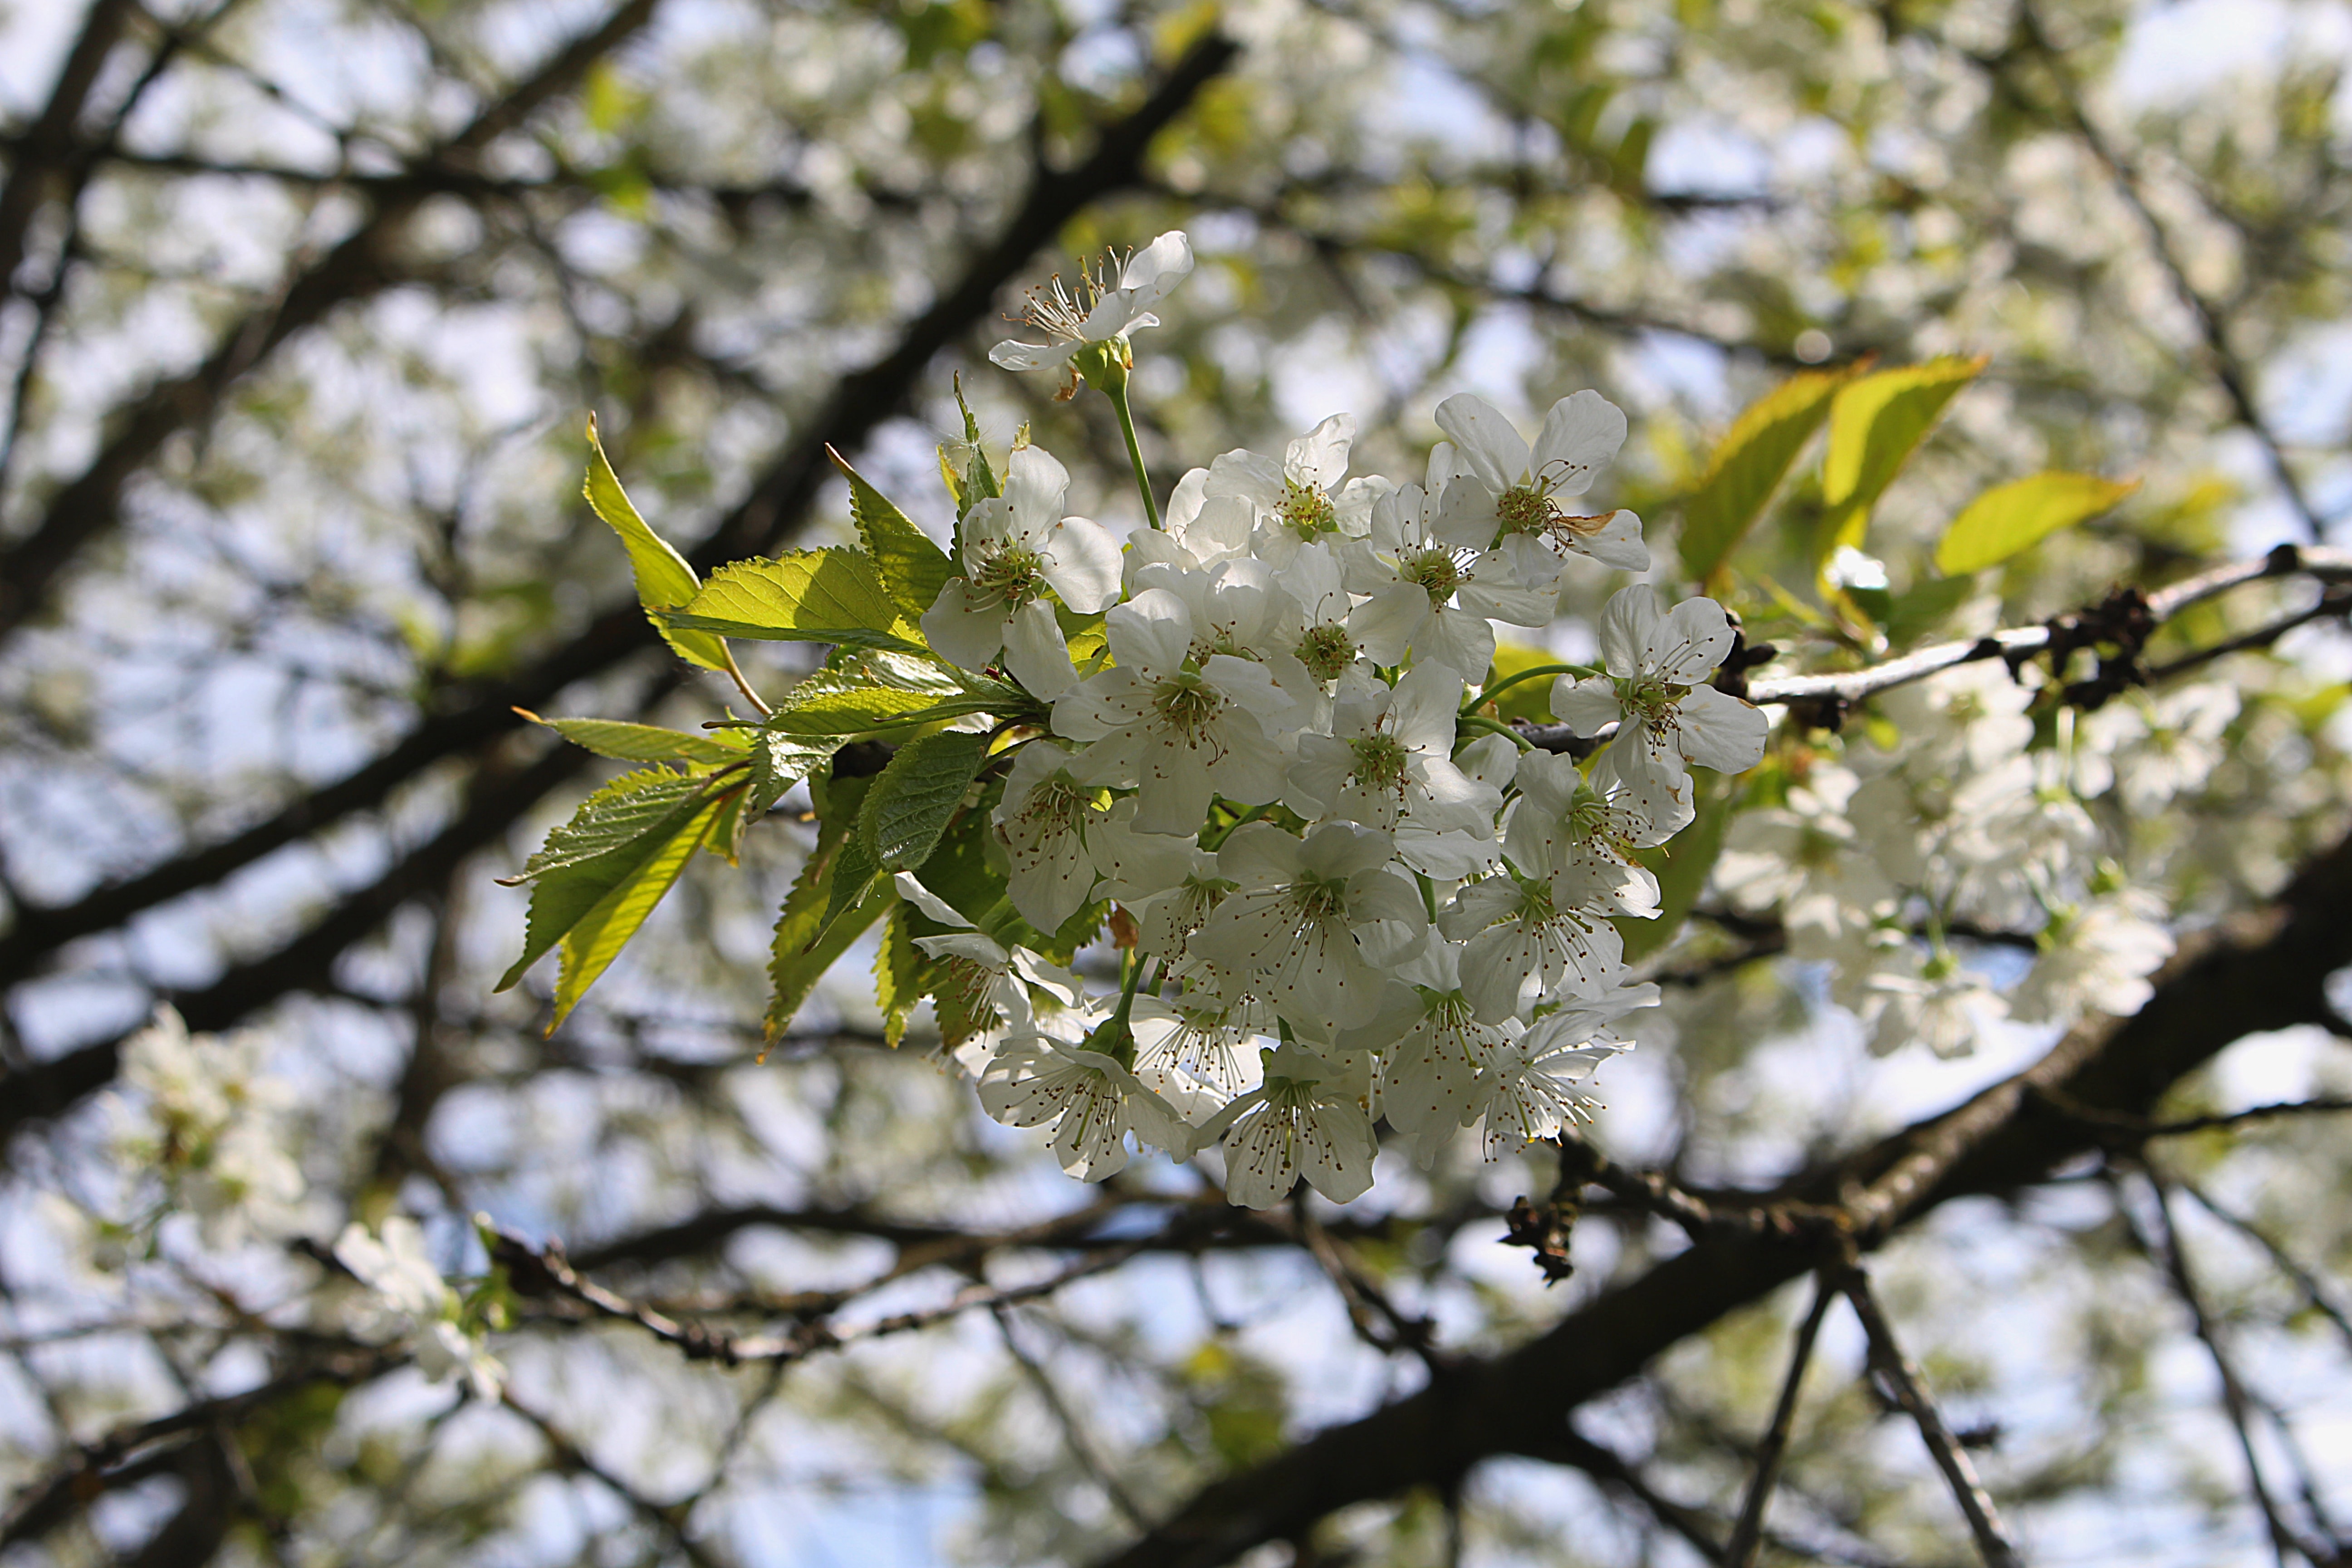 bunch of white petaled flowers on branches